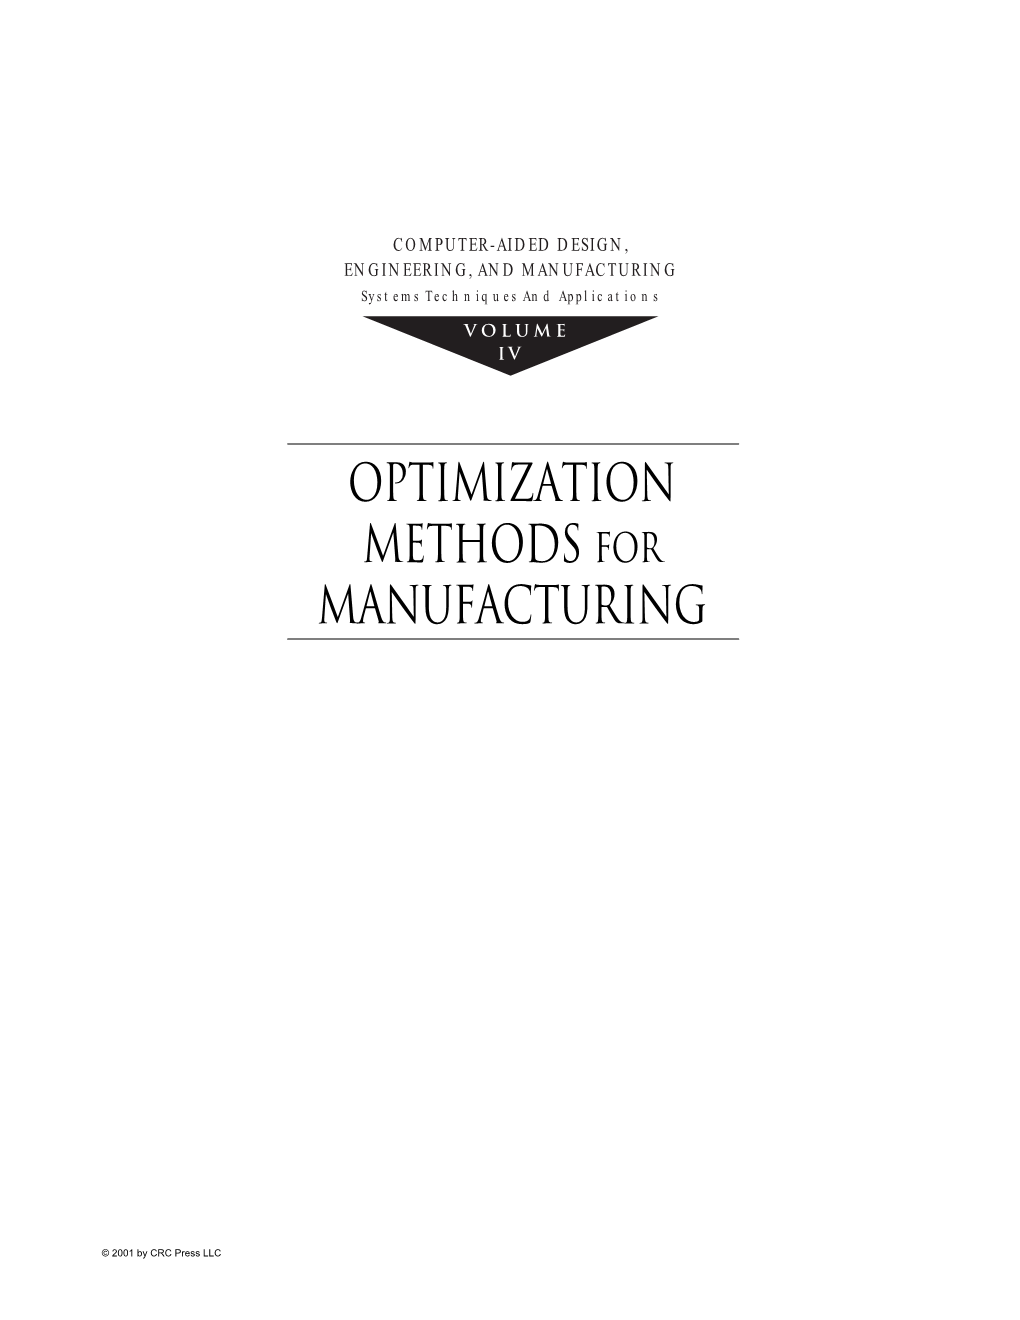 Optimization Methods for Manufacturing COMPUTER-AIDED DESIGN, ENGINEERING, and MANUFACTURING Systems Techniques and Applications